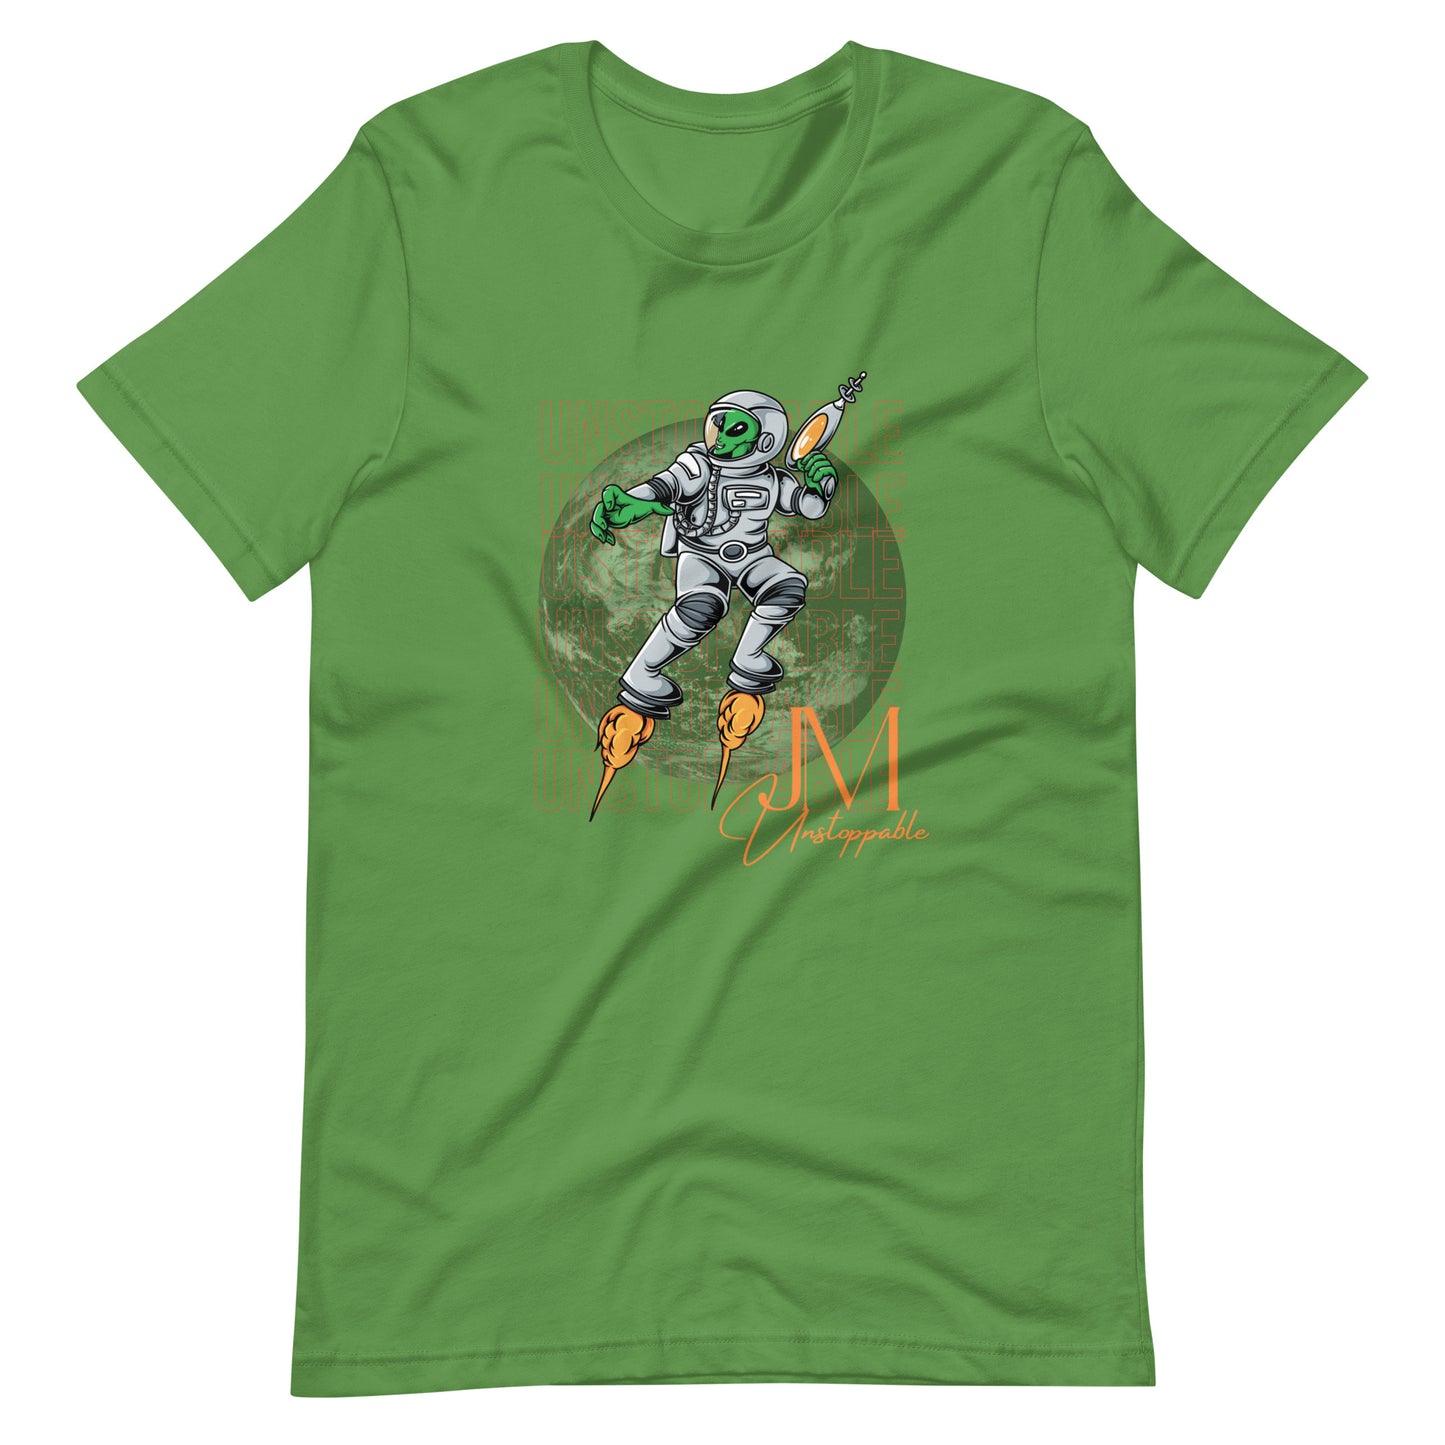 Out of this world Unisex t-shirt